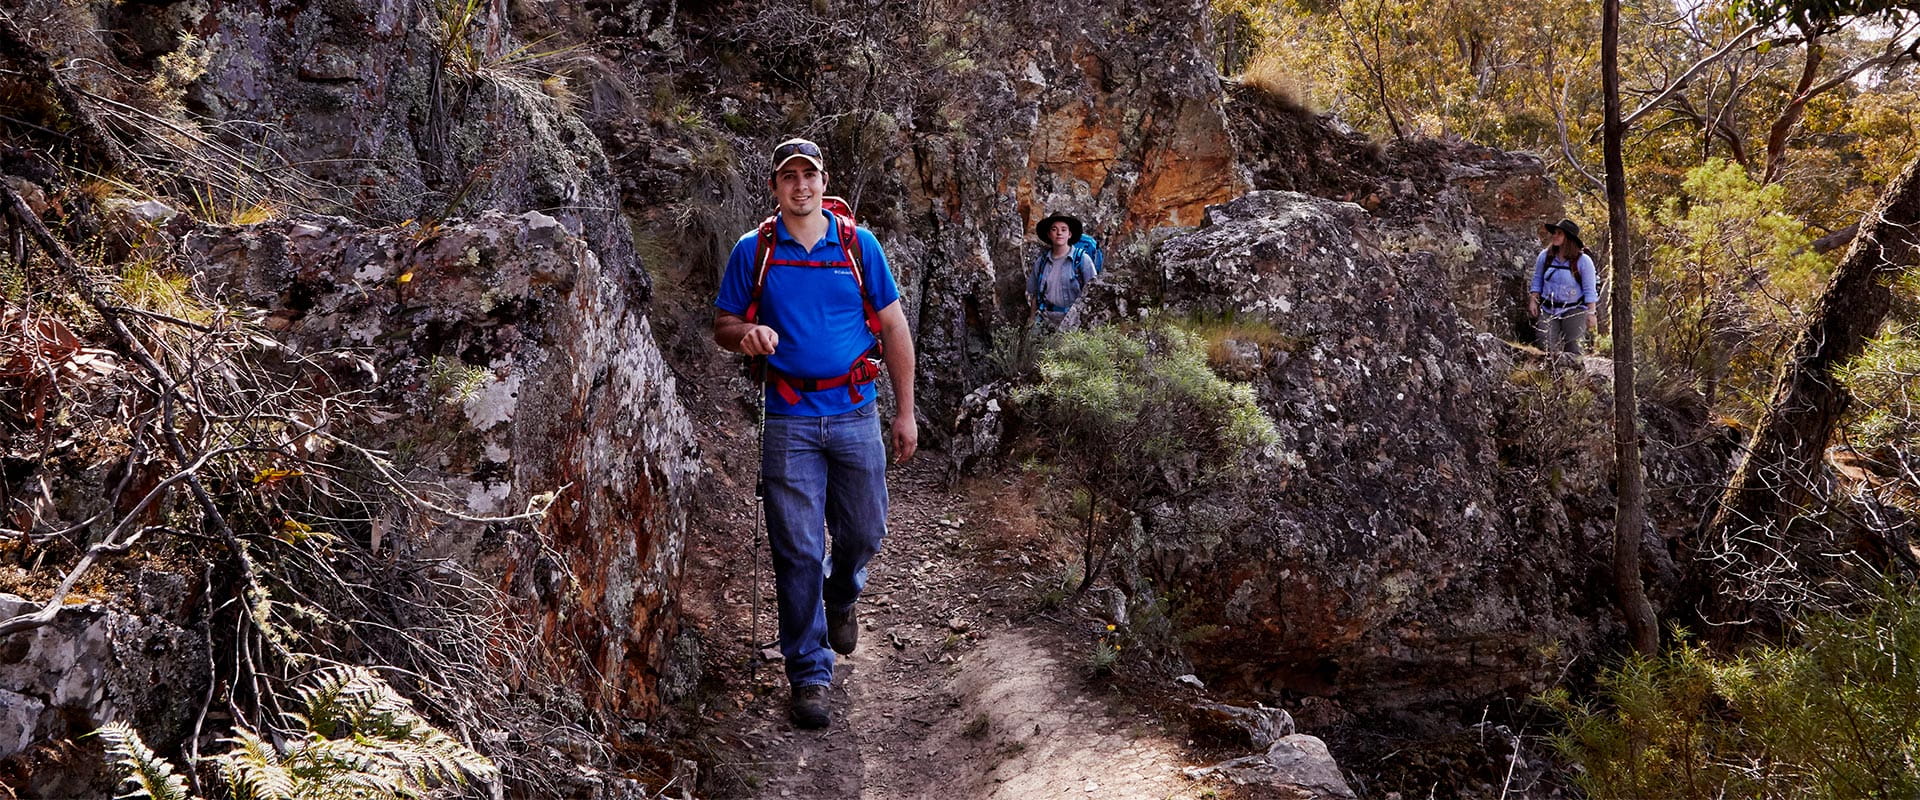 A man in jeans, a short-sleeve blue top, with sunglasses resting on top of a baseball cap, wears a red backpack and holds a hiking stick as he smiles and walks along a dirt track between boulders and vegetation as another two walkers follow behind him.